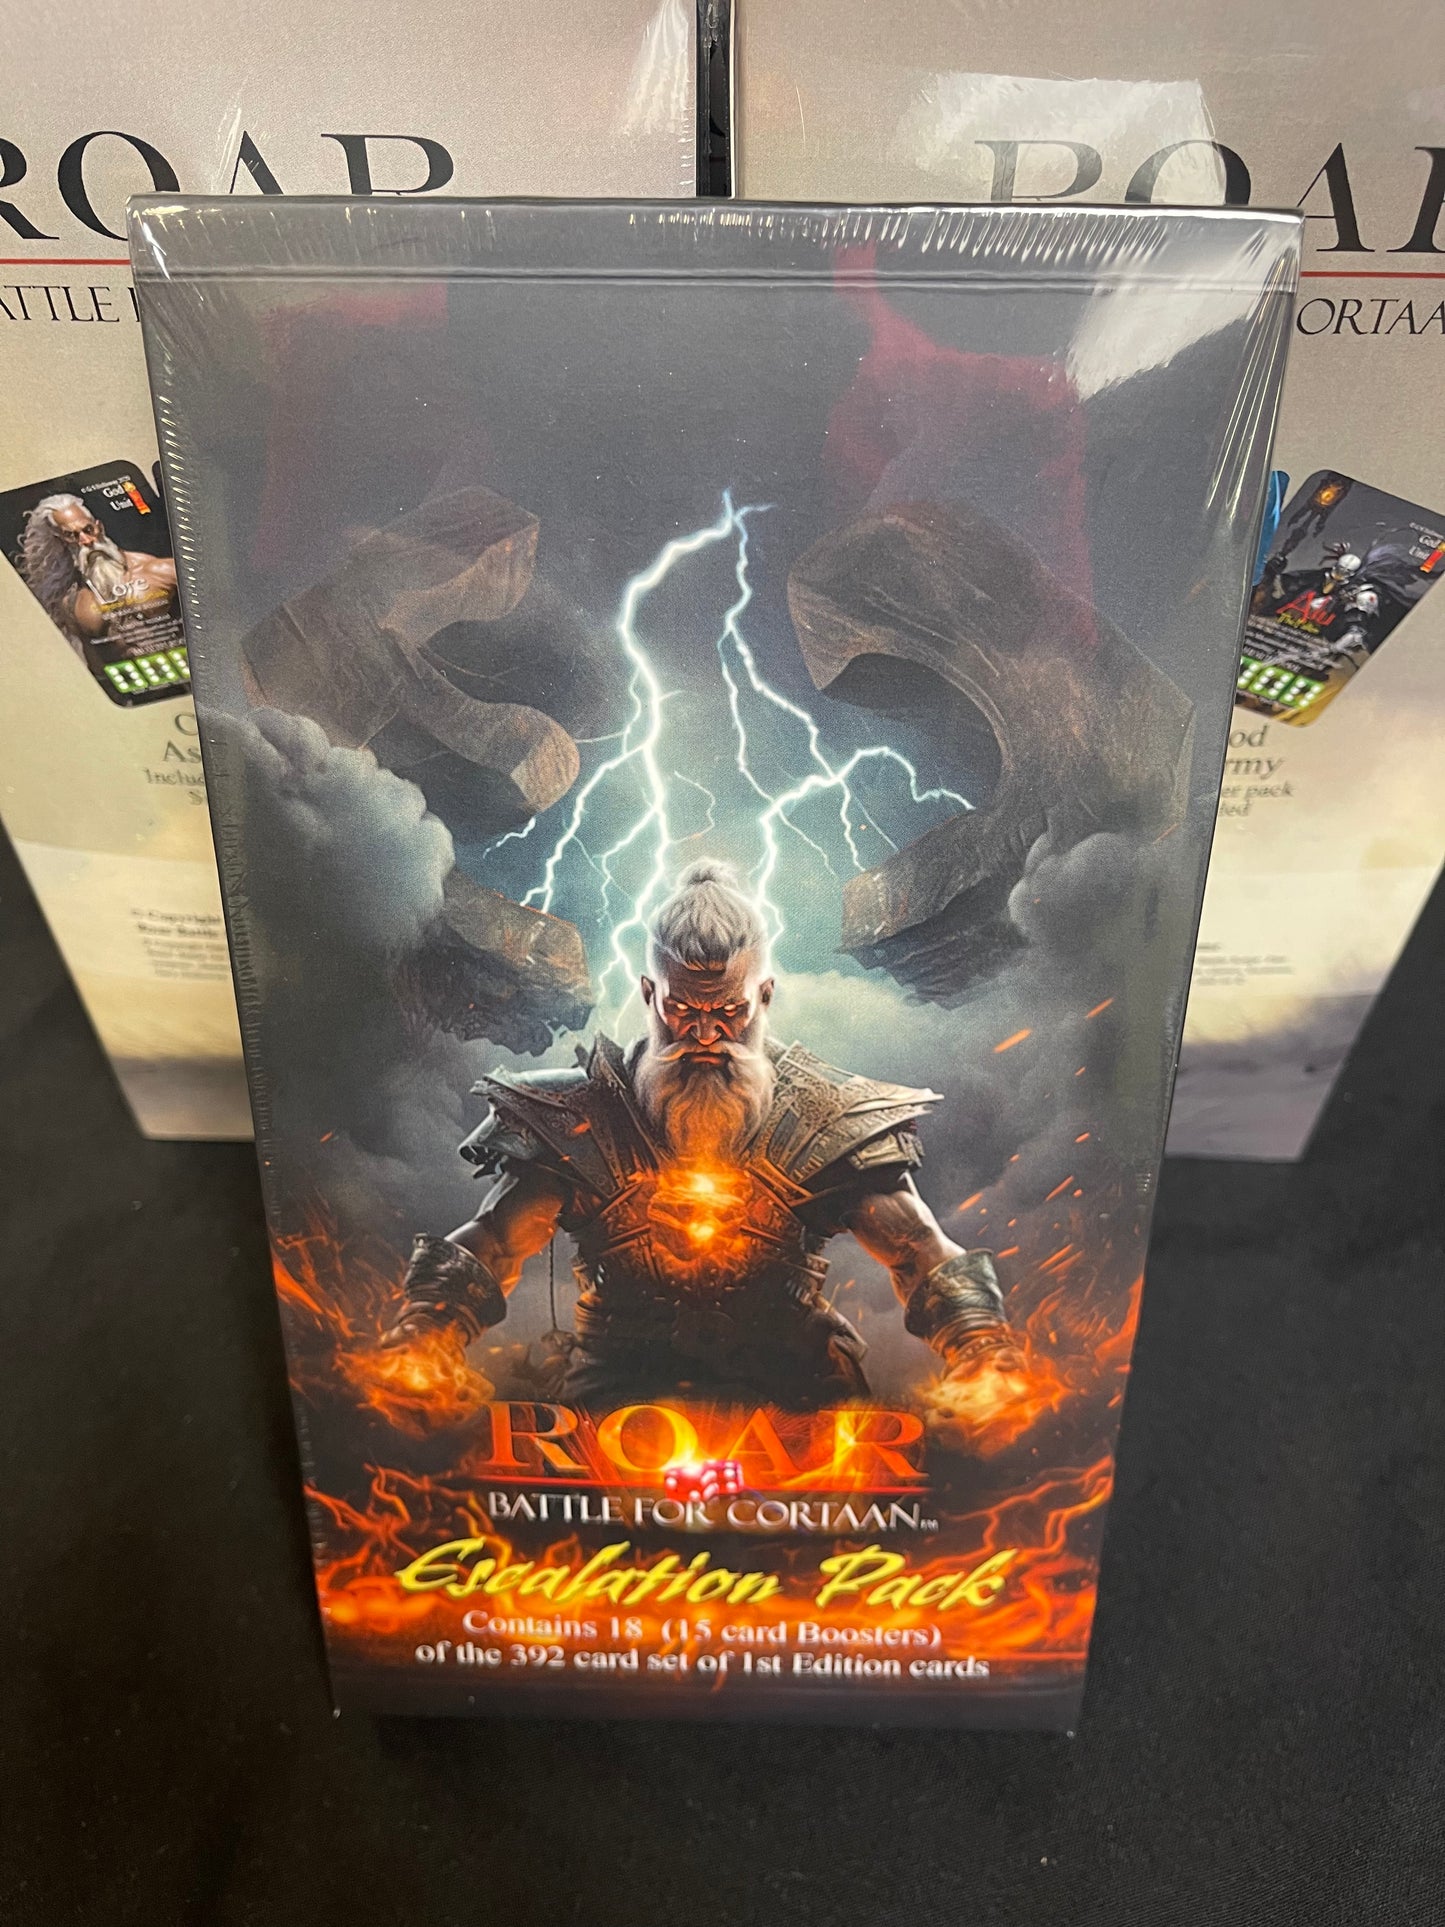 Lore unchained box art (quantities are limited)